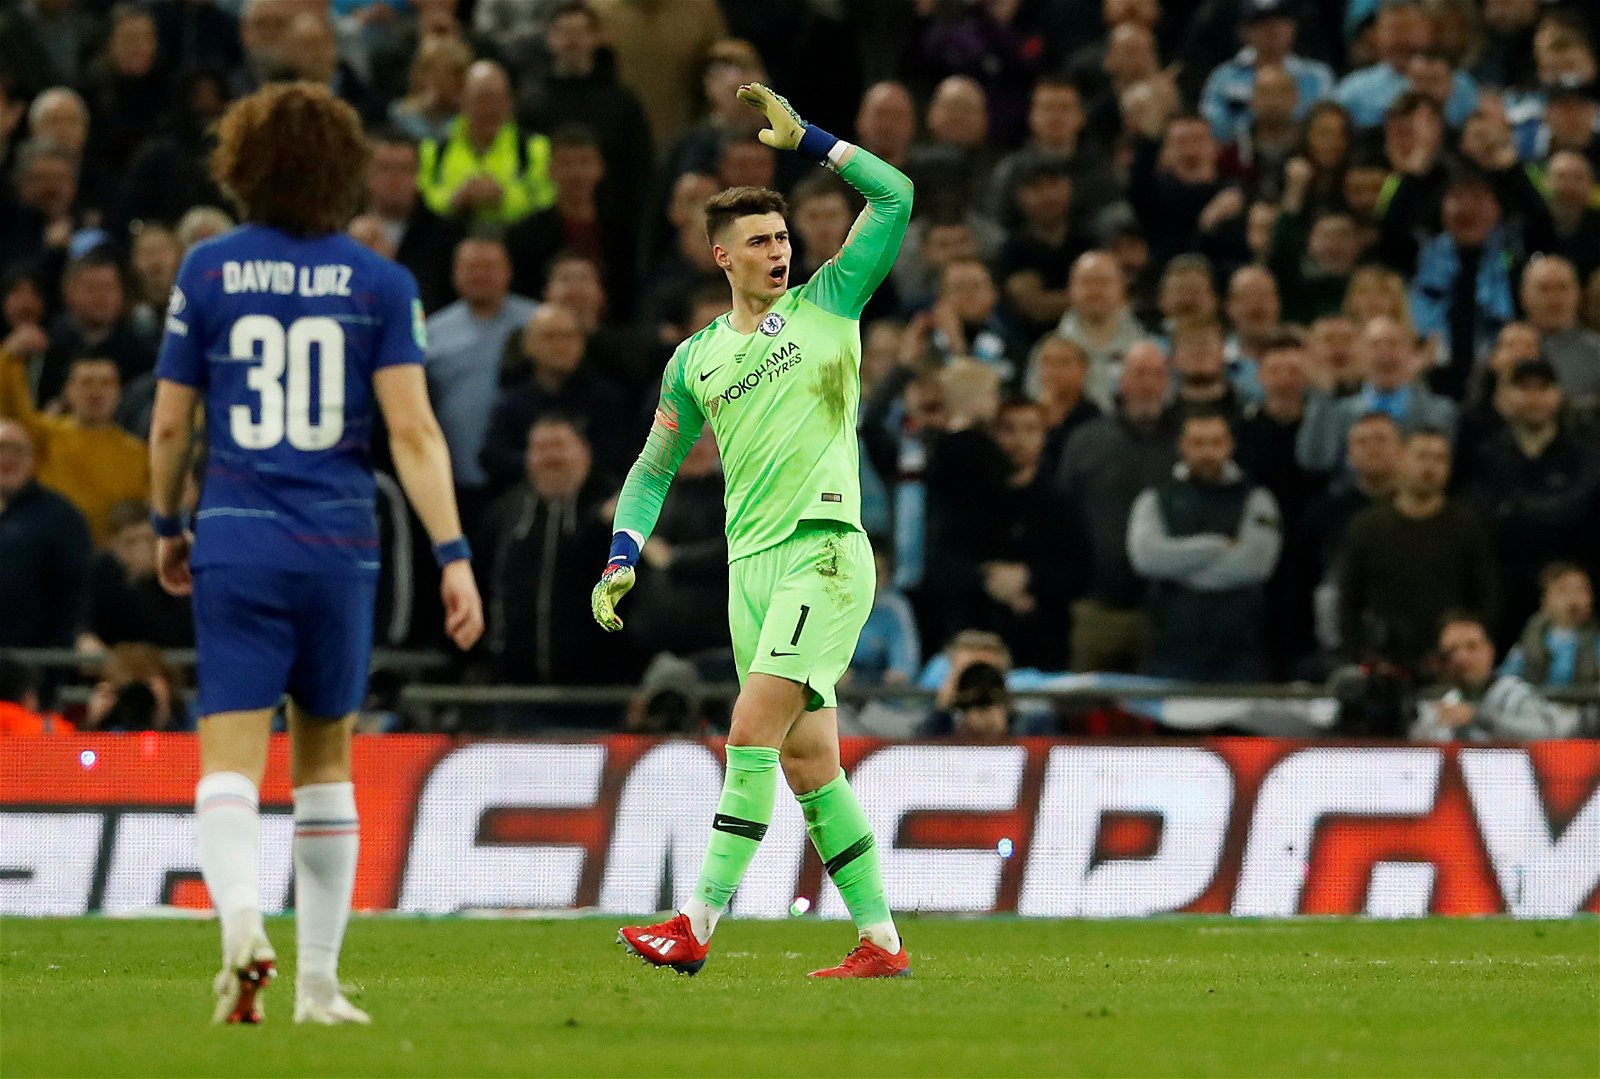 Kepa Arrizabalaga To Be Dropped In The Spurs Match